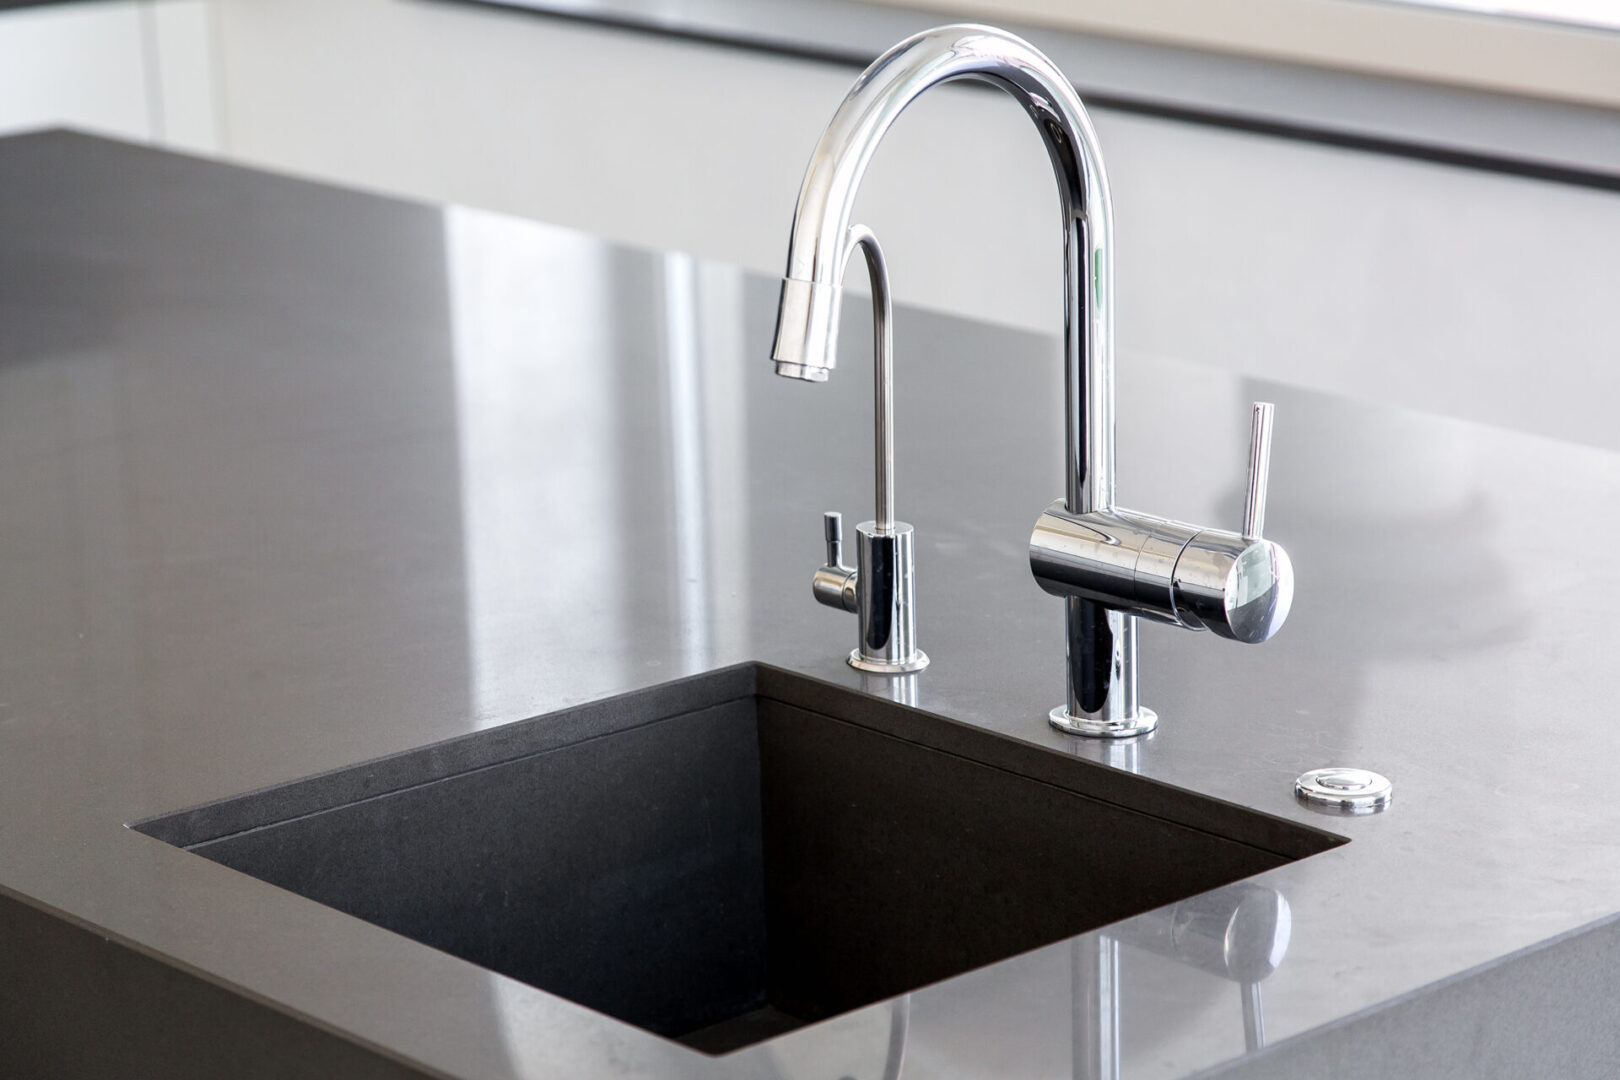 A black sink with chrome faucet and counter.